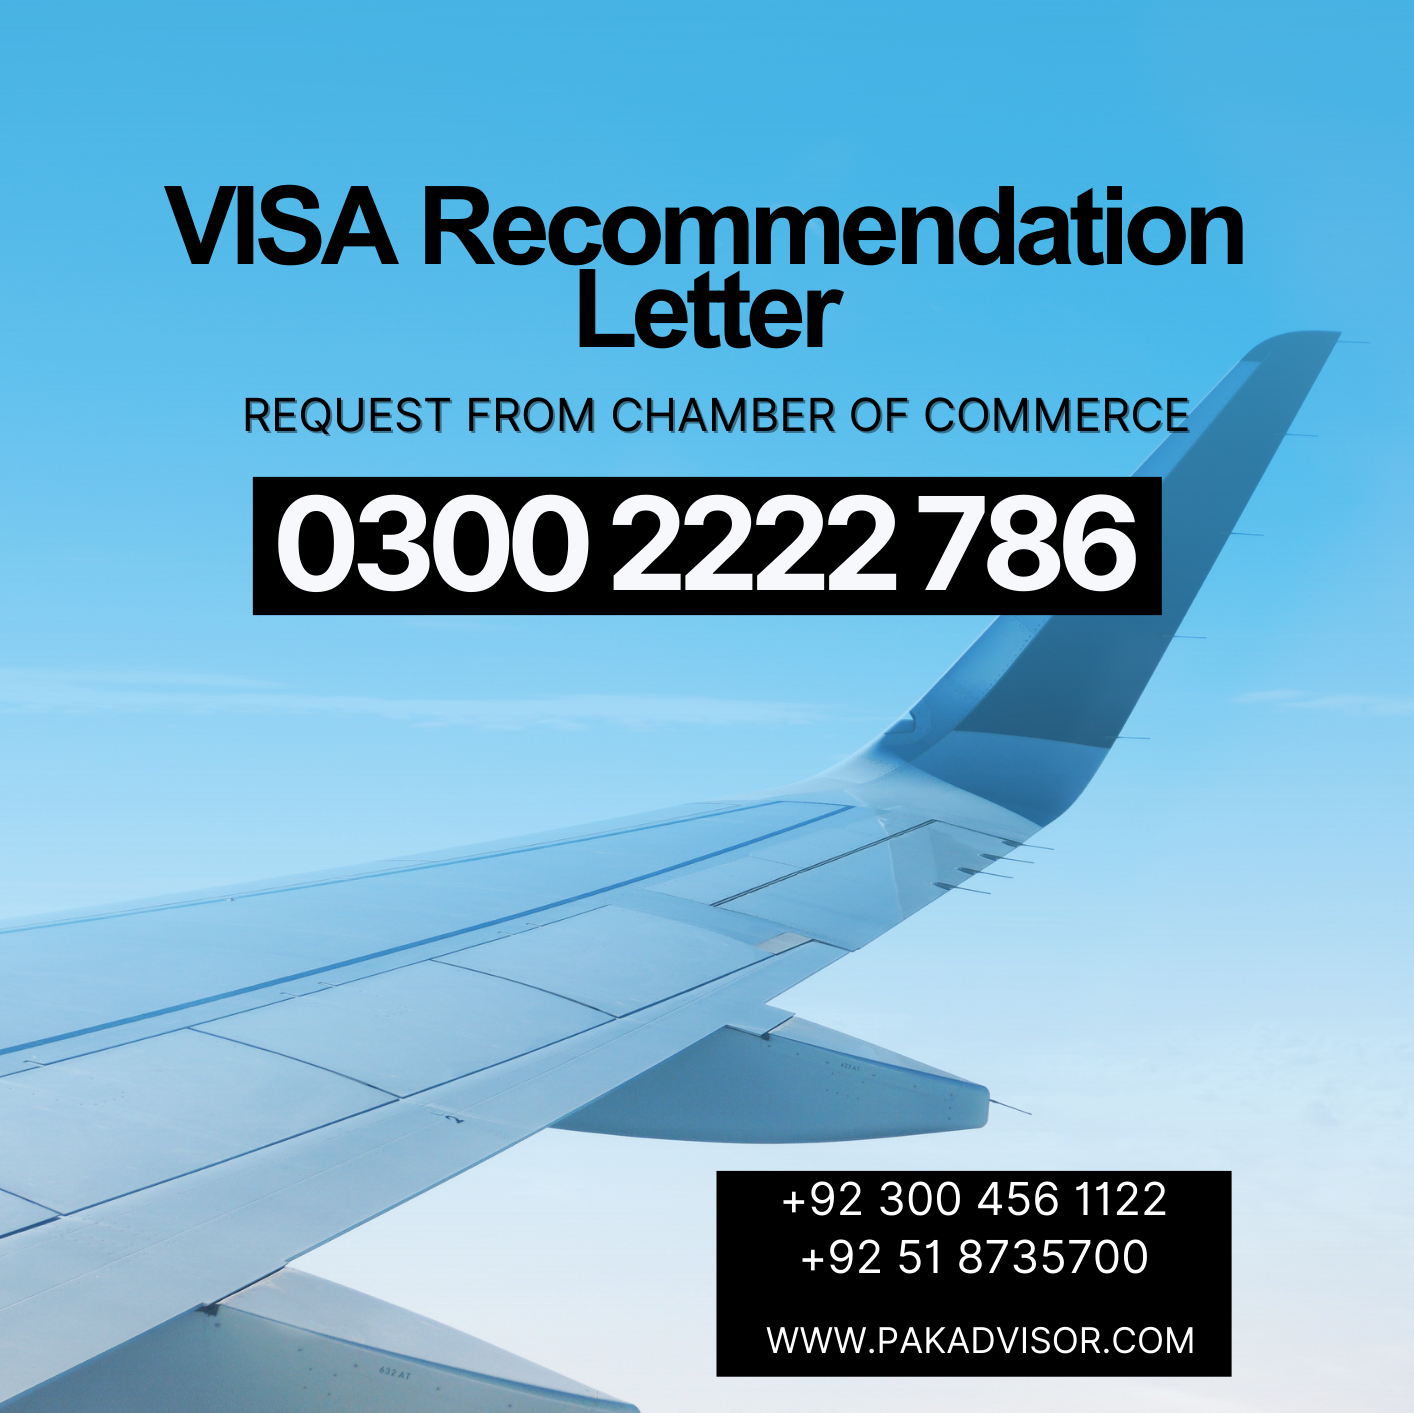 visa recommendation letter request from chamber of commerce